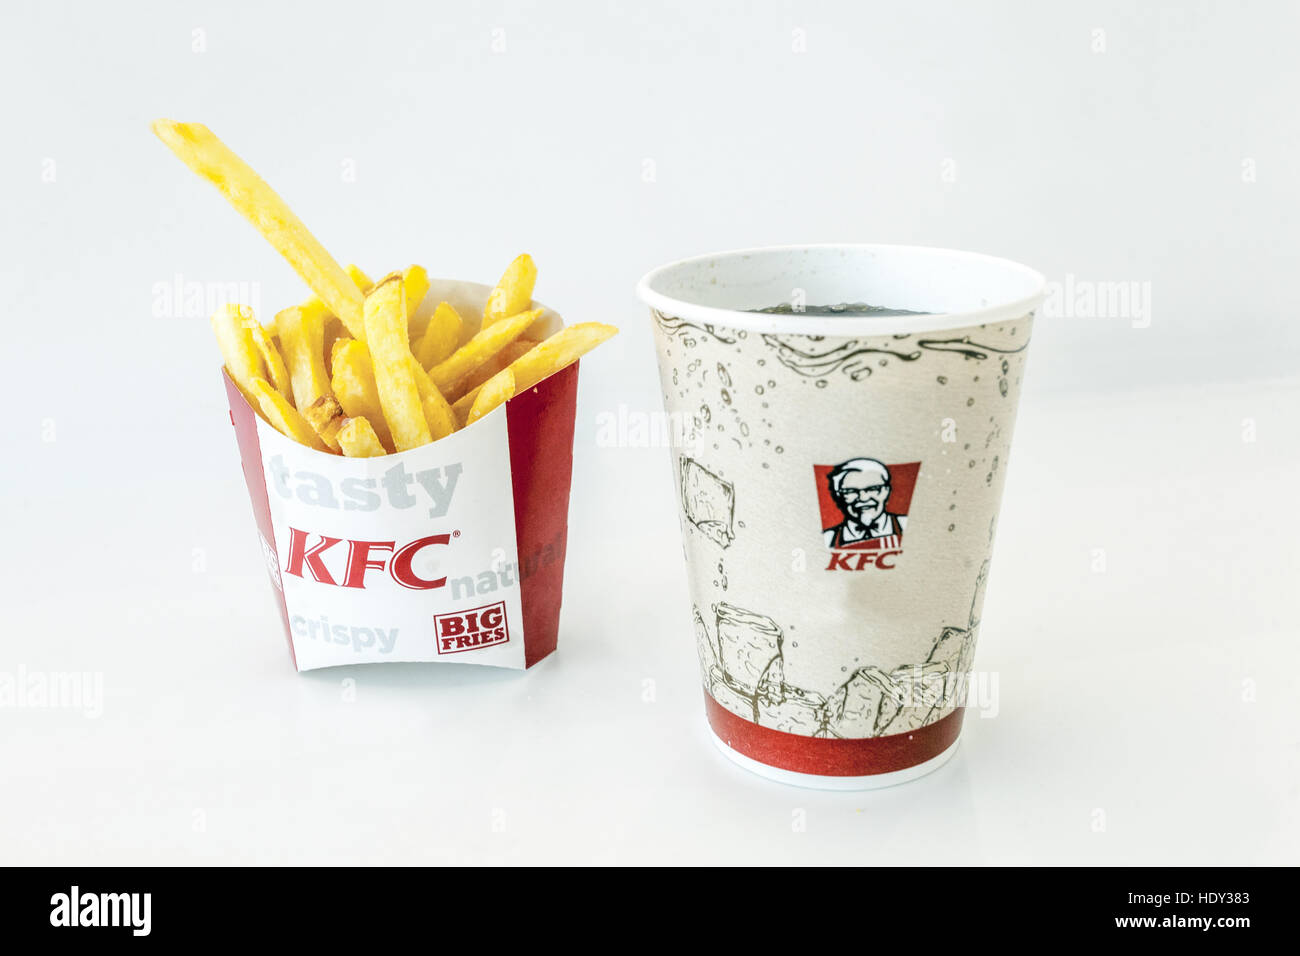 KFC meal, Kentucky Fried Chicken, French fries, cup, drink Stock Photo